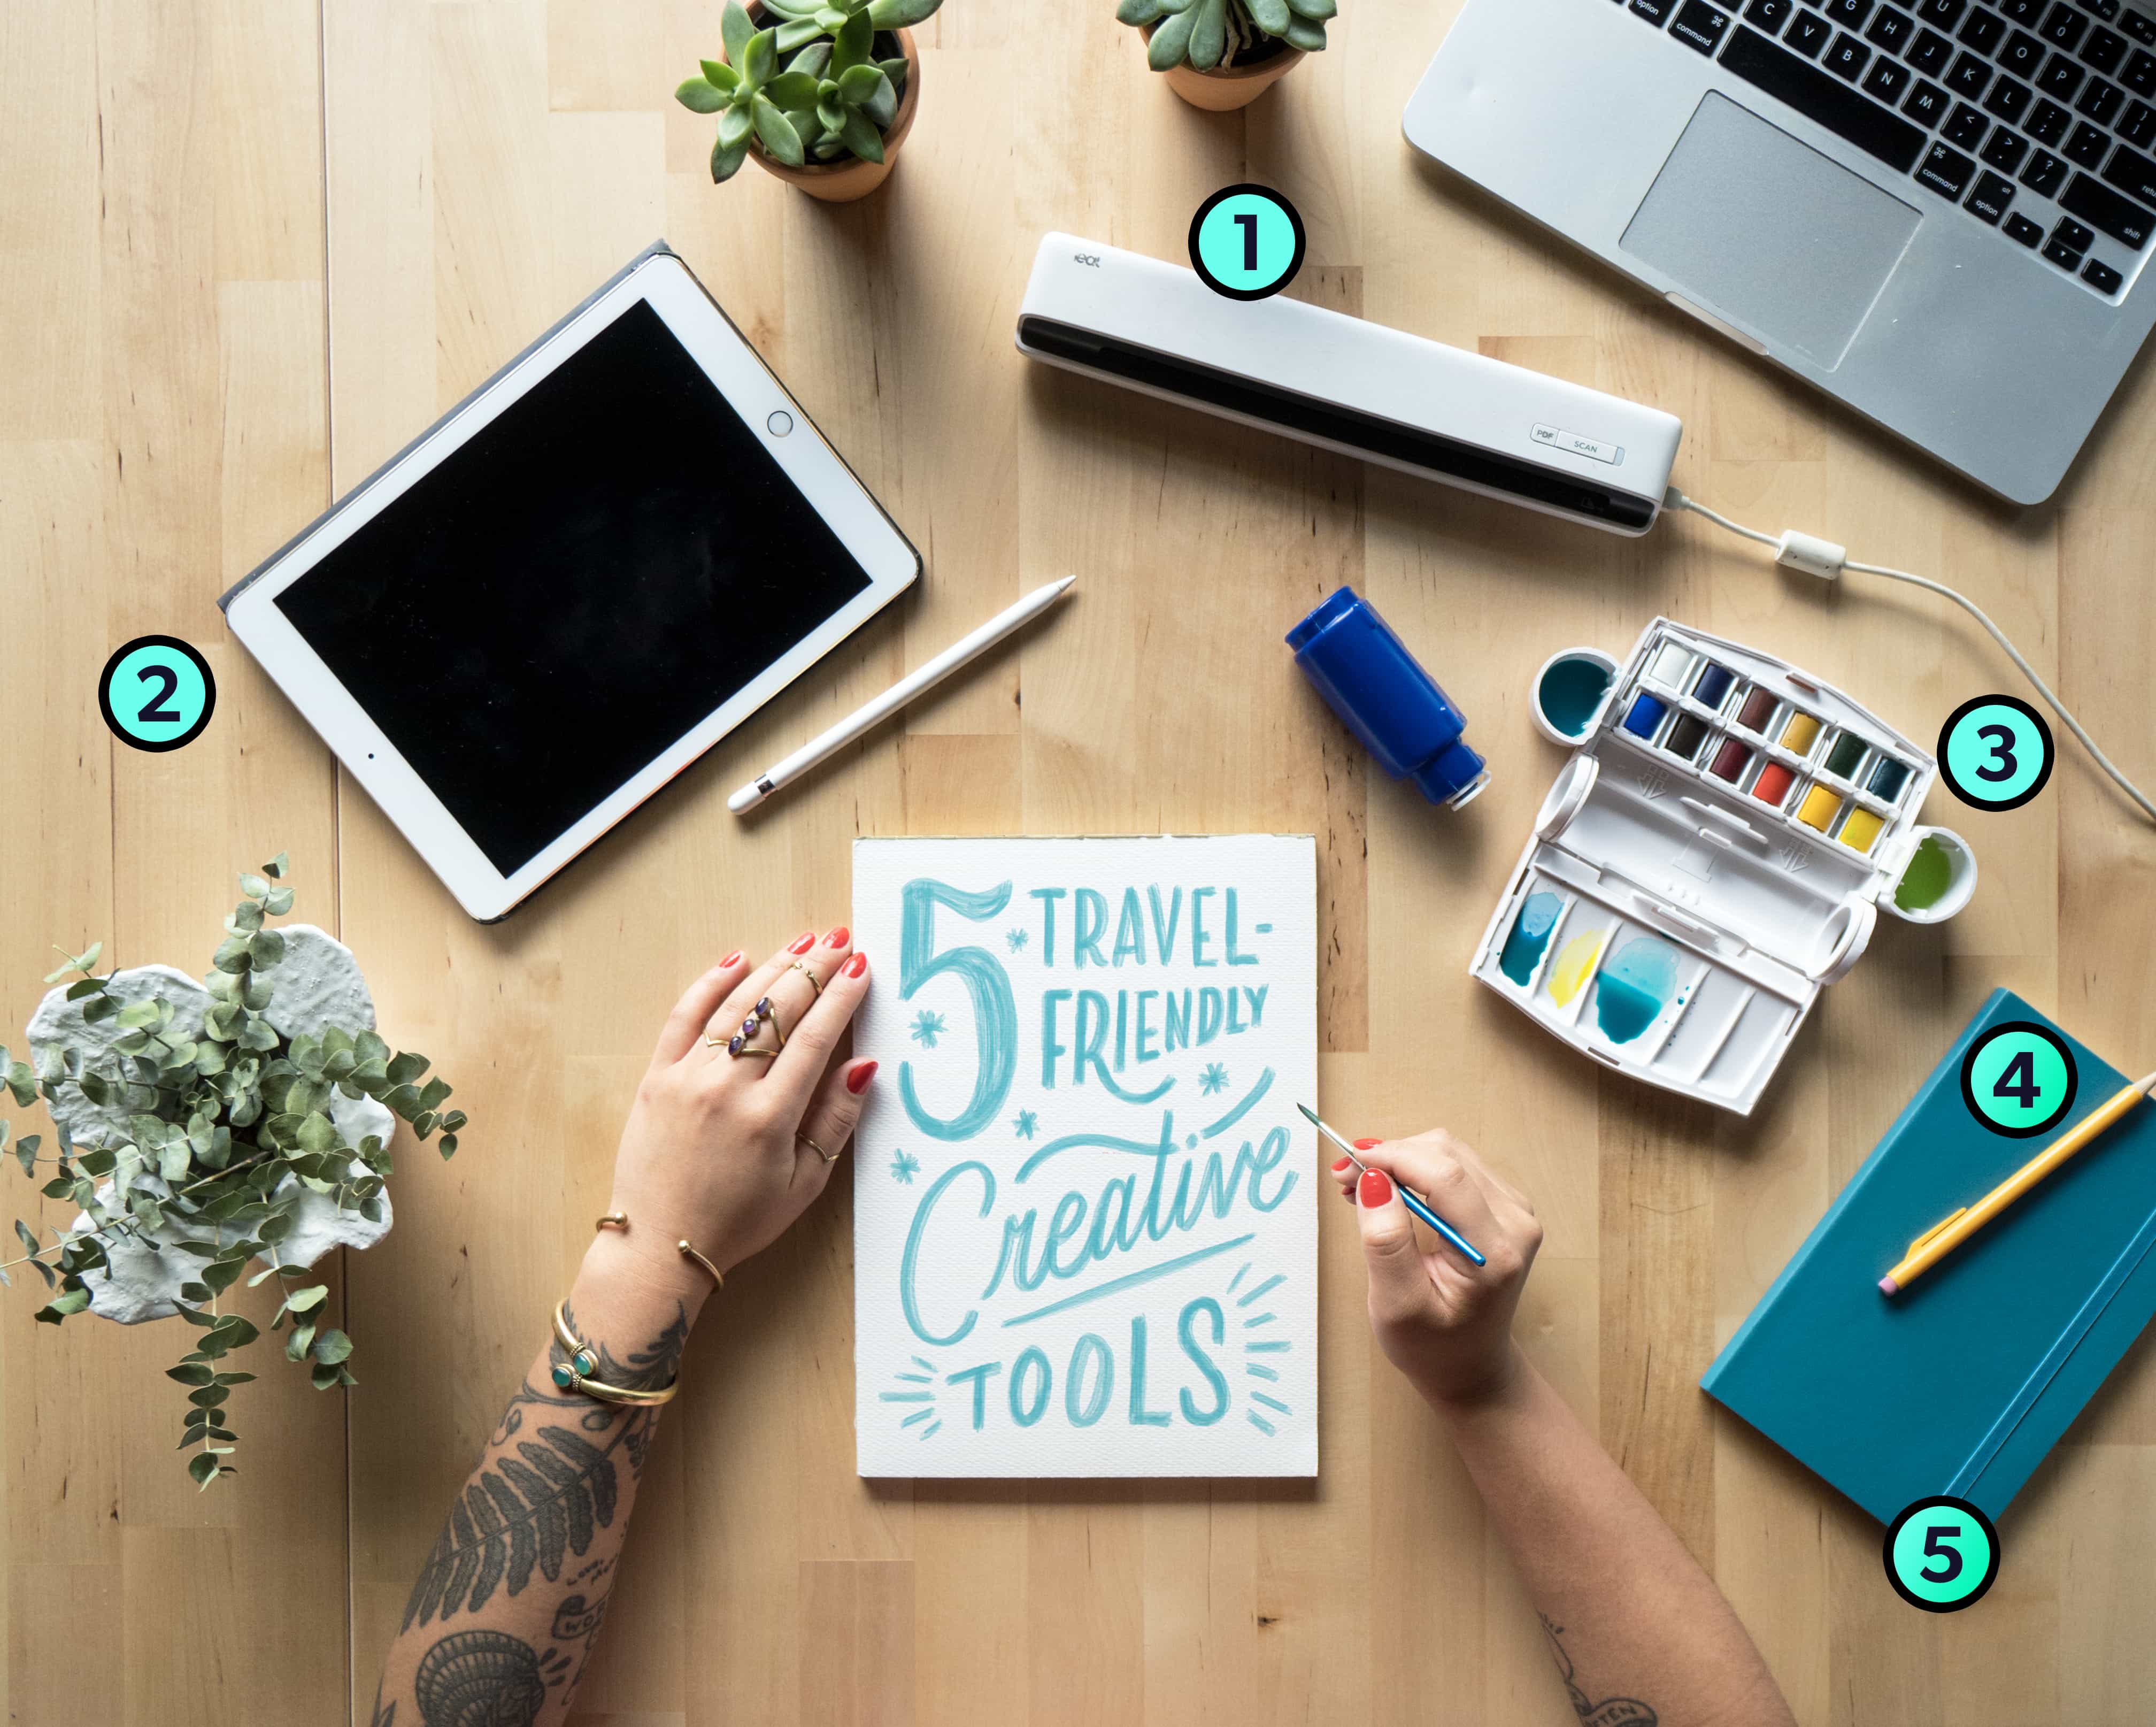 Lauren Hom's 5 Creative Tools to help you make art while traveling